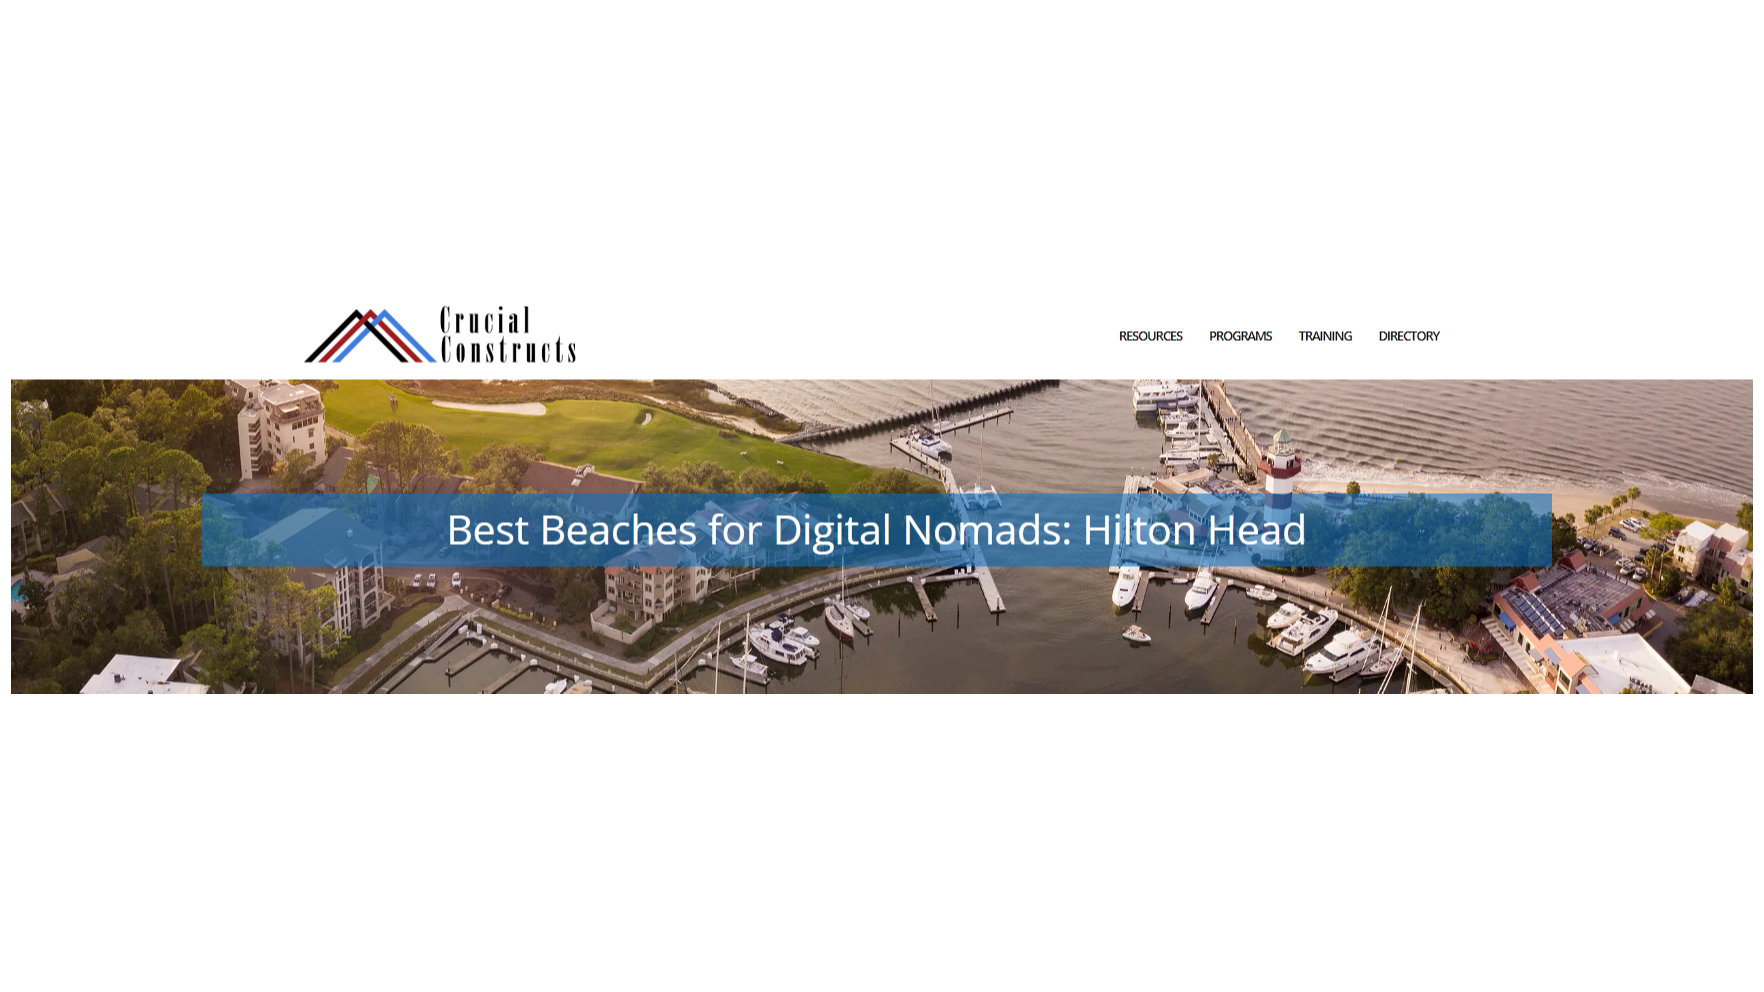 Hilton Head Beach Offers Ideal Eating, Fun & Networking Opportunities For Nomads